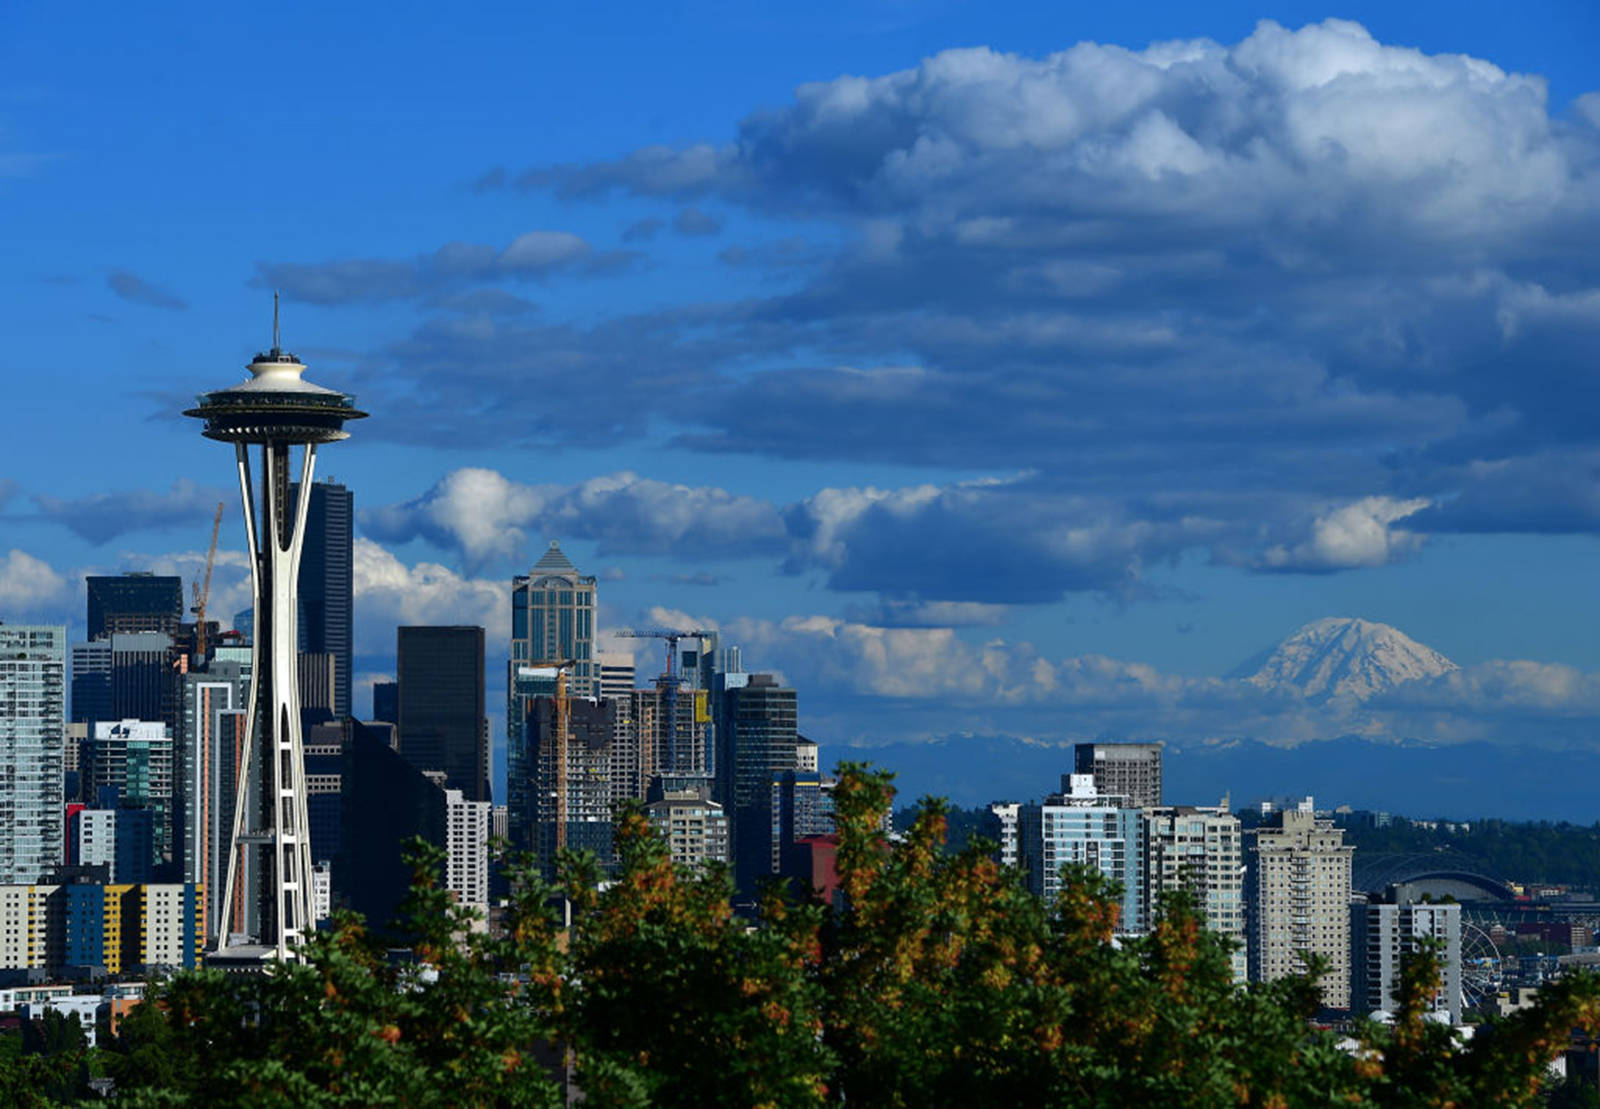 Donald Miralle | Getty Images
A general view of the Seattle Space Needle and downtown skyline with Mount Rainier in the background on June 8, 2019, in Seattle.